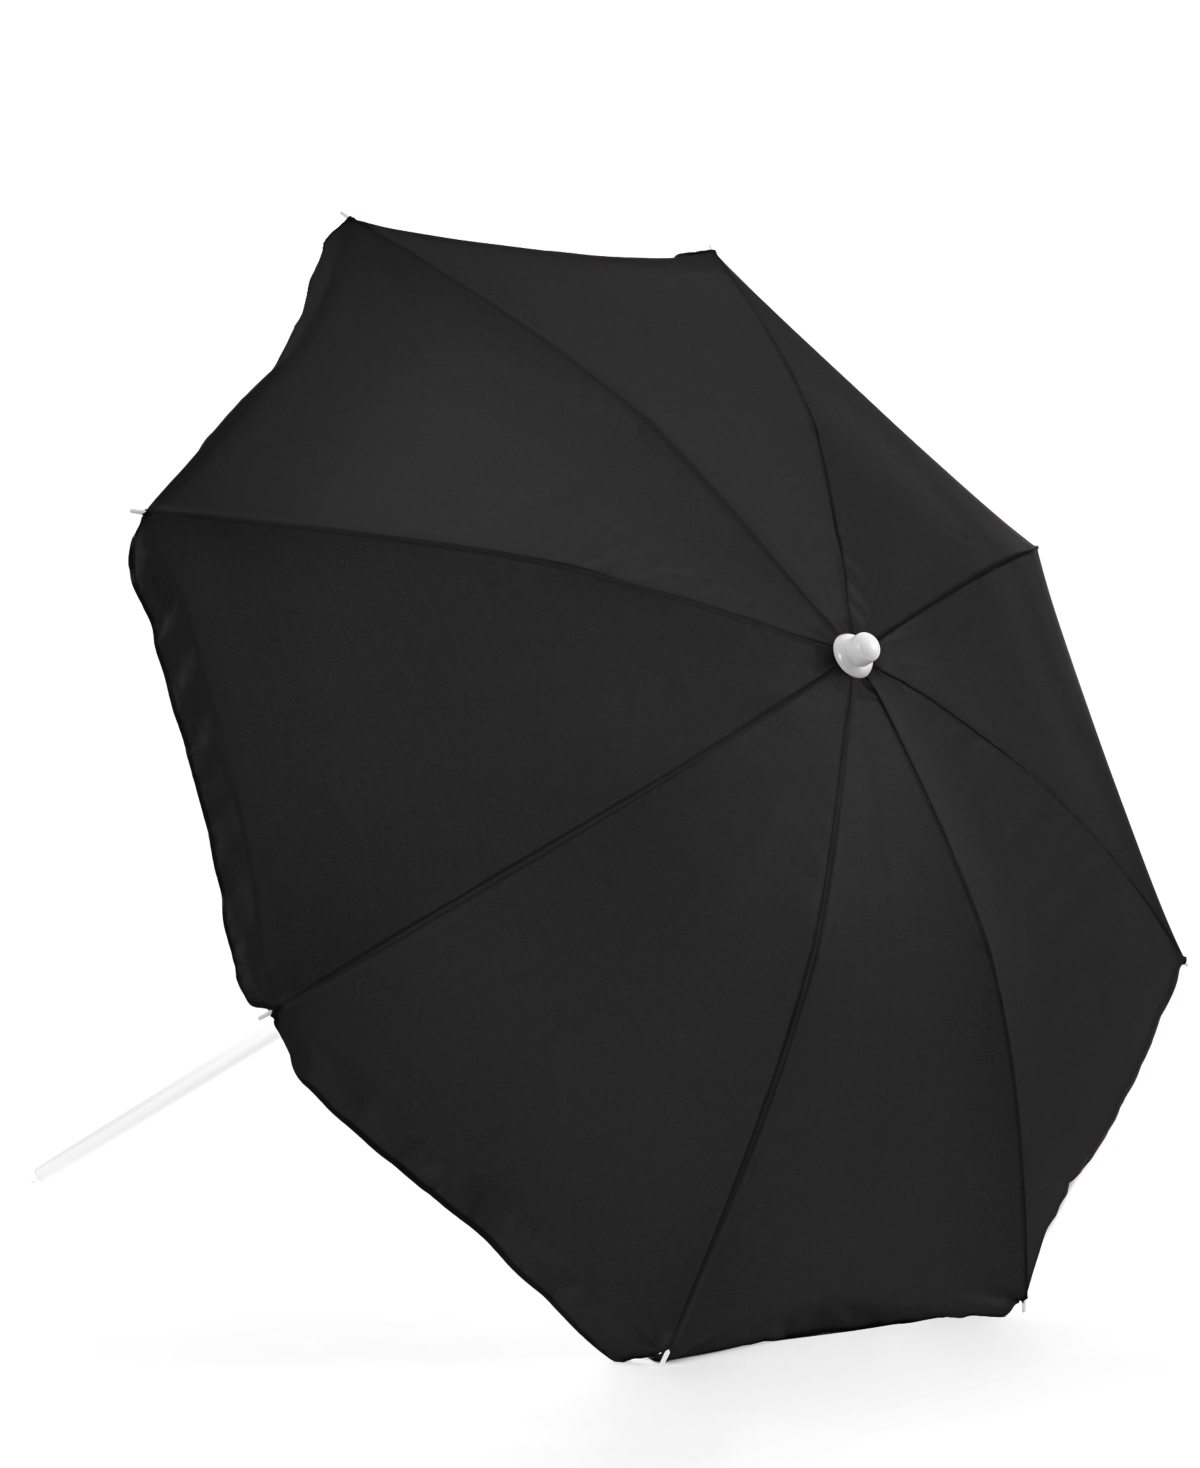 by Picnic Time Large 5.5 ft. Portable Beach Umbrella - BLACK